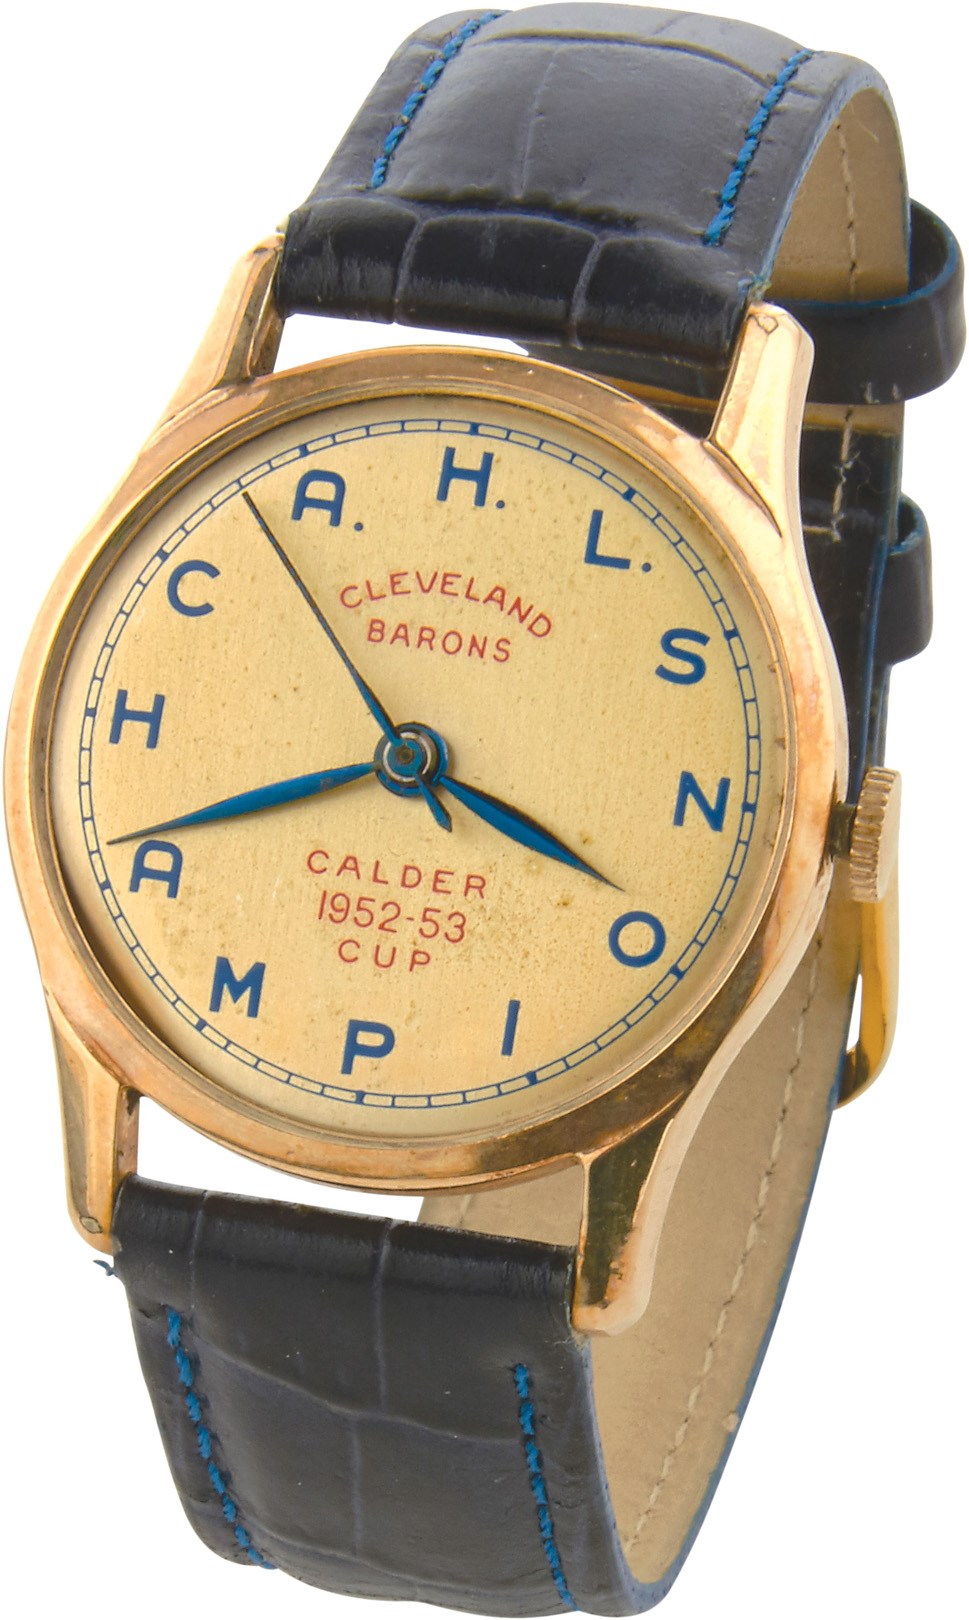 - 1952-53 Cleveland Barons Calder Cup Championship Watch